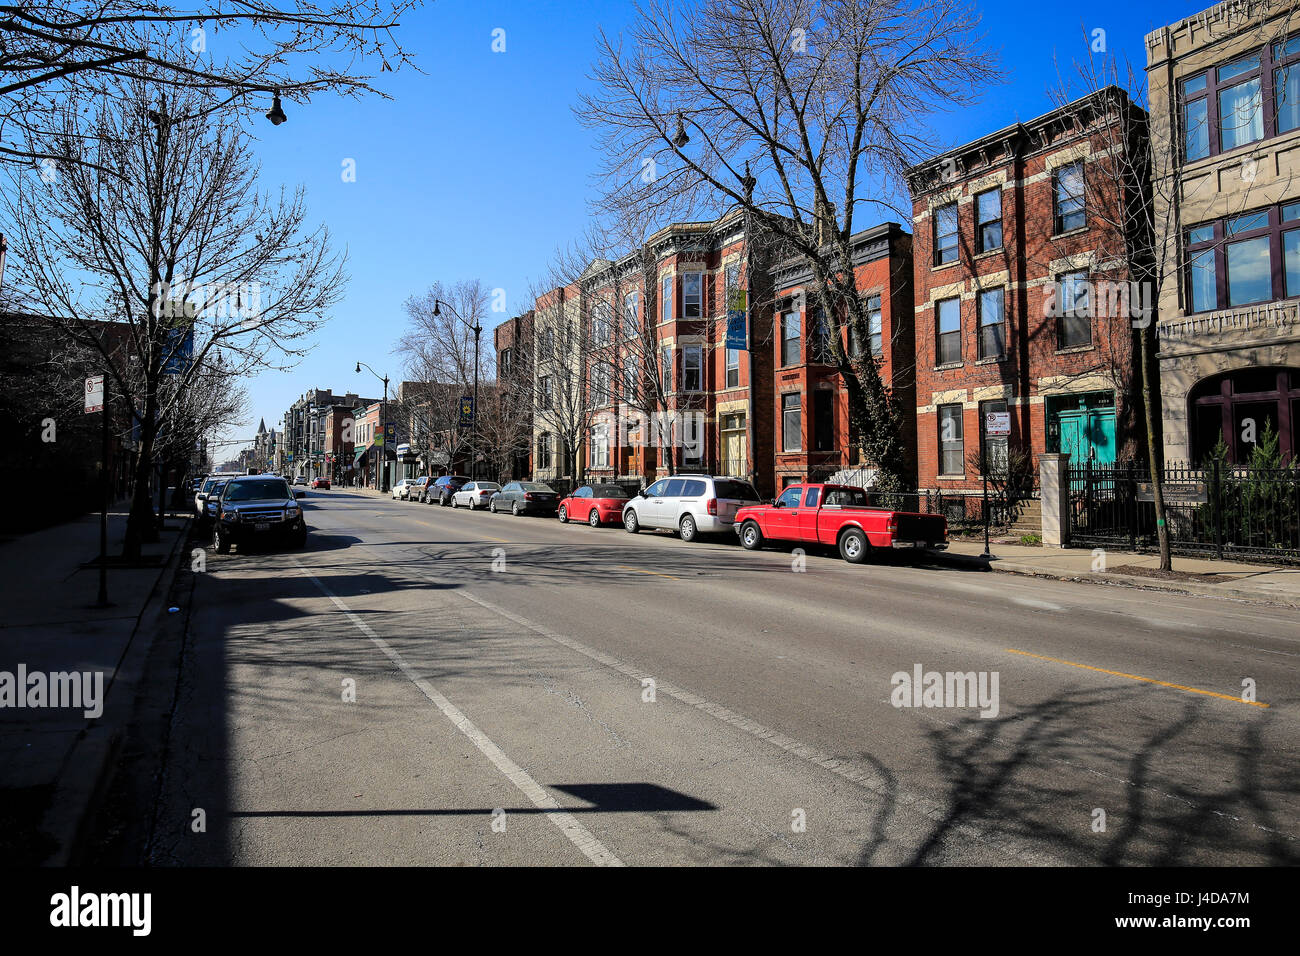 W Webster Ave, Lincoln Park, Chicago, Illinois, USA, Nordamerika, W Webster Ave, Lincoln Park, Chicago, Illinois, USA, Nordamerika Stockfoto